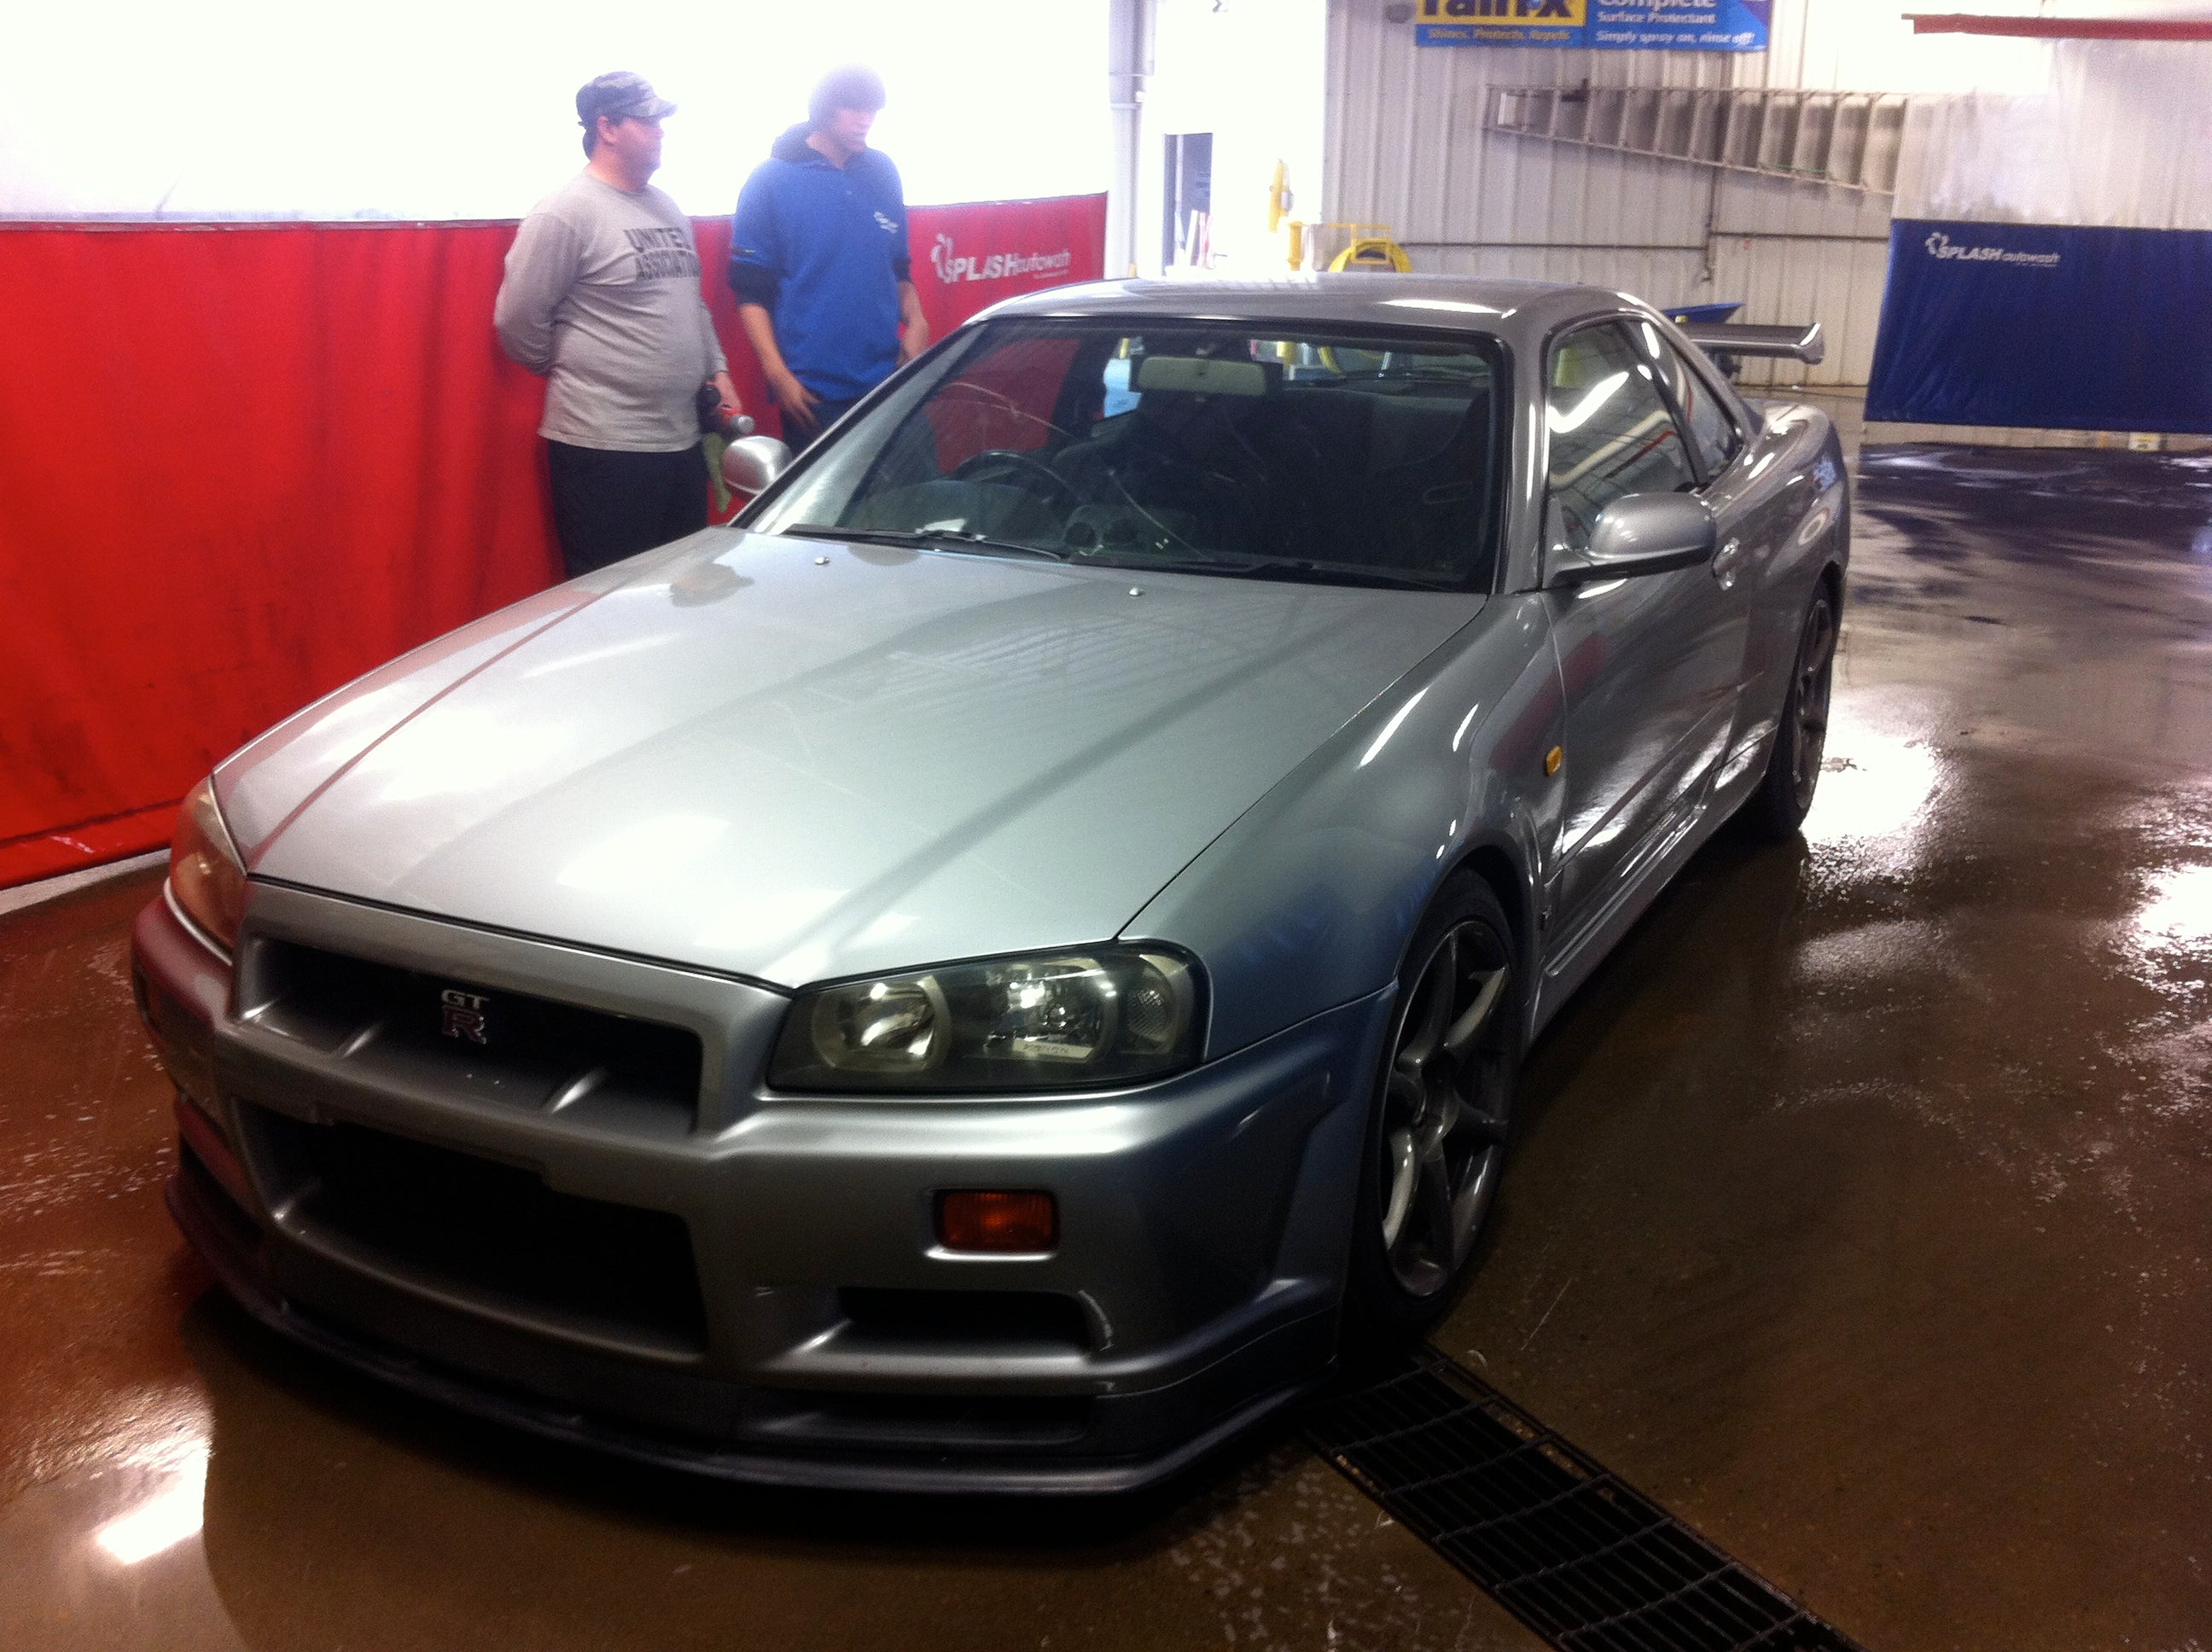 Are nissan skyline r34 legal in canada #8